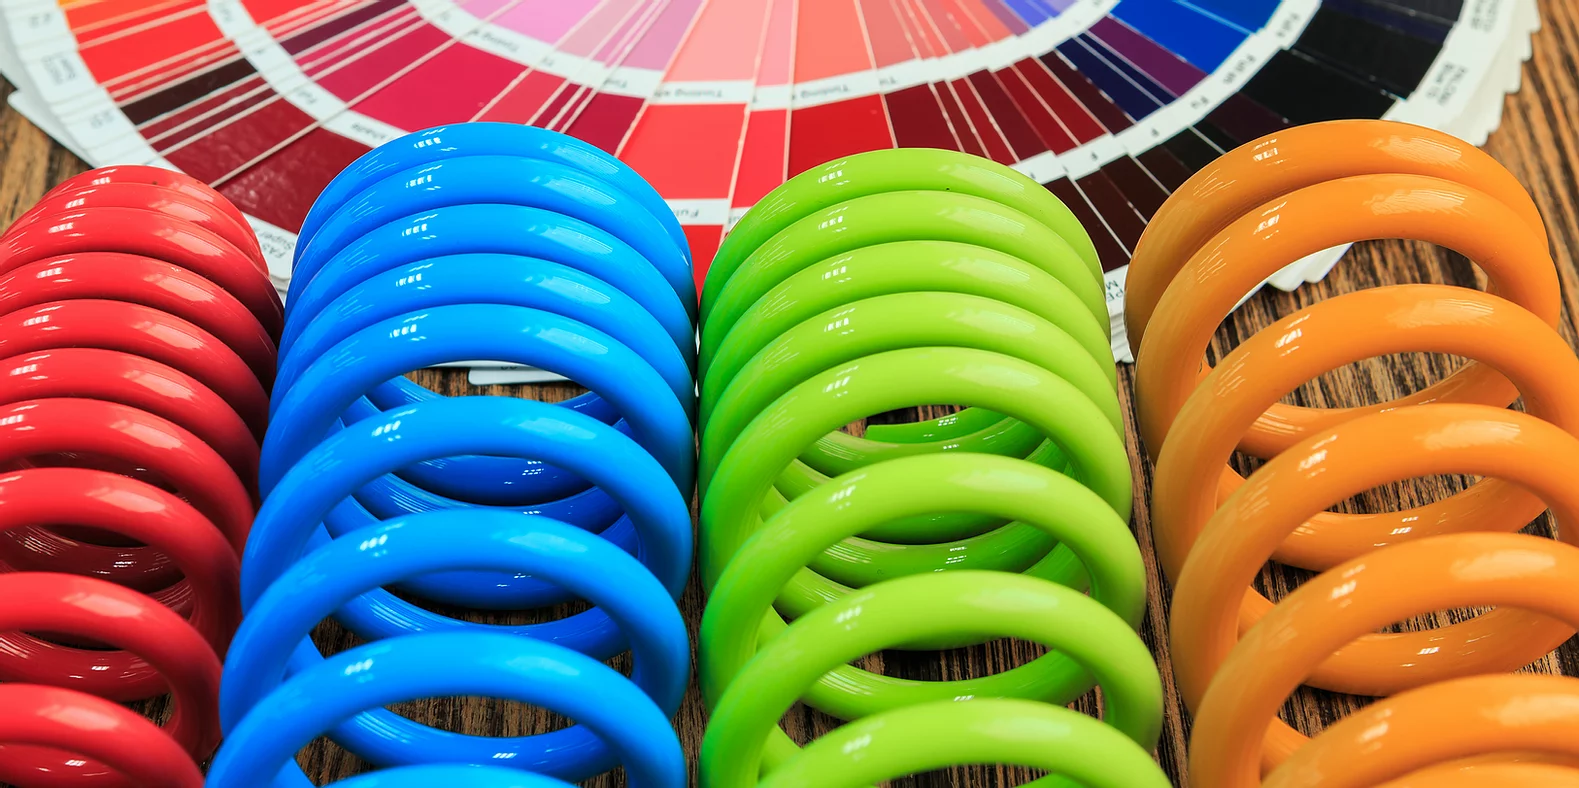 What is powder coating